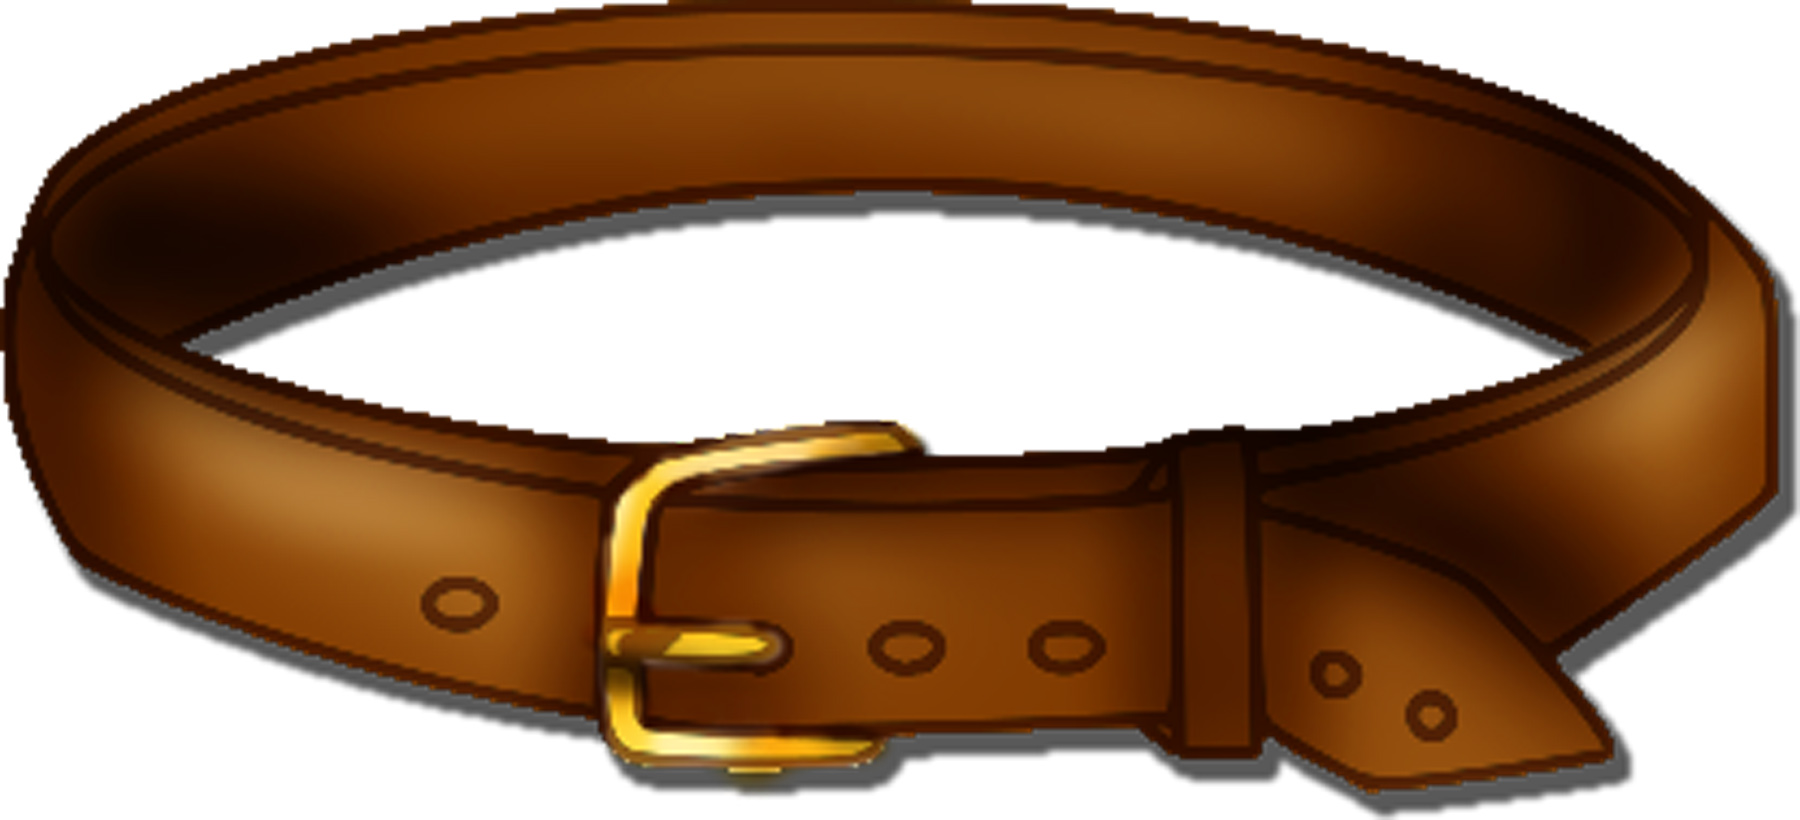 Belt on clipart - Clipground